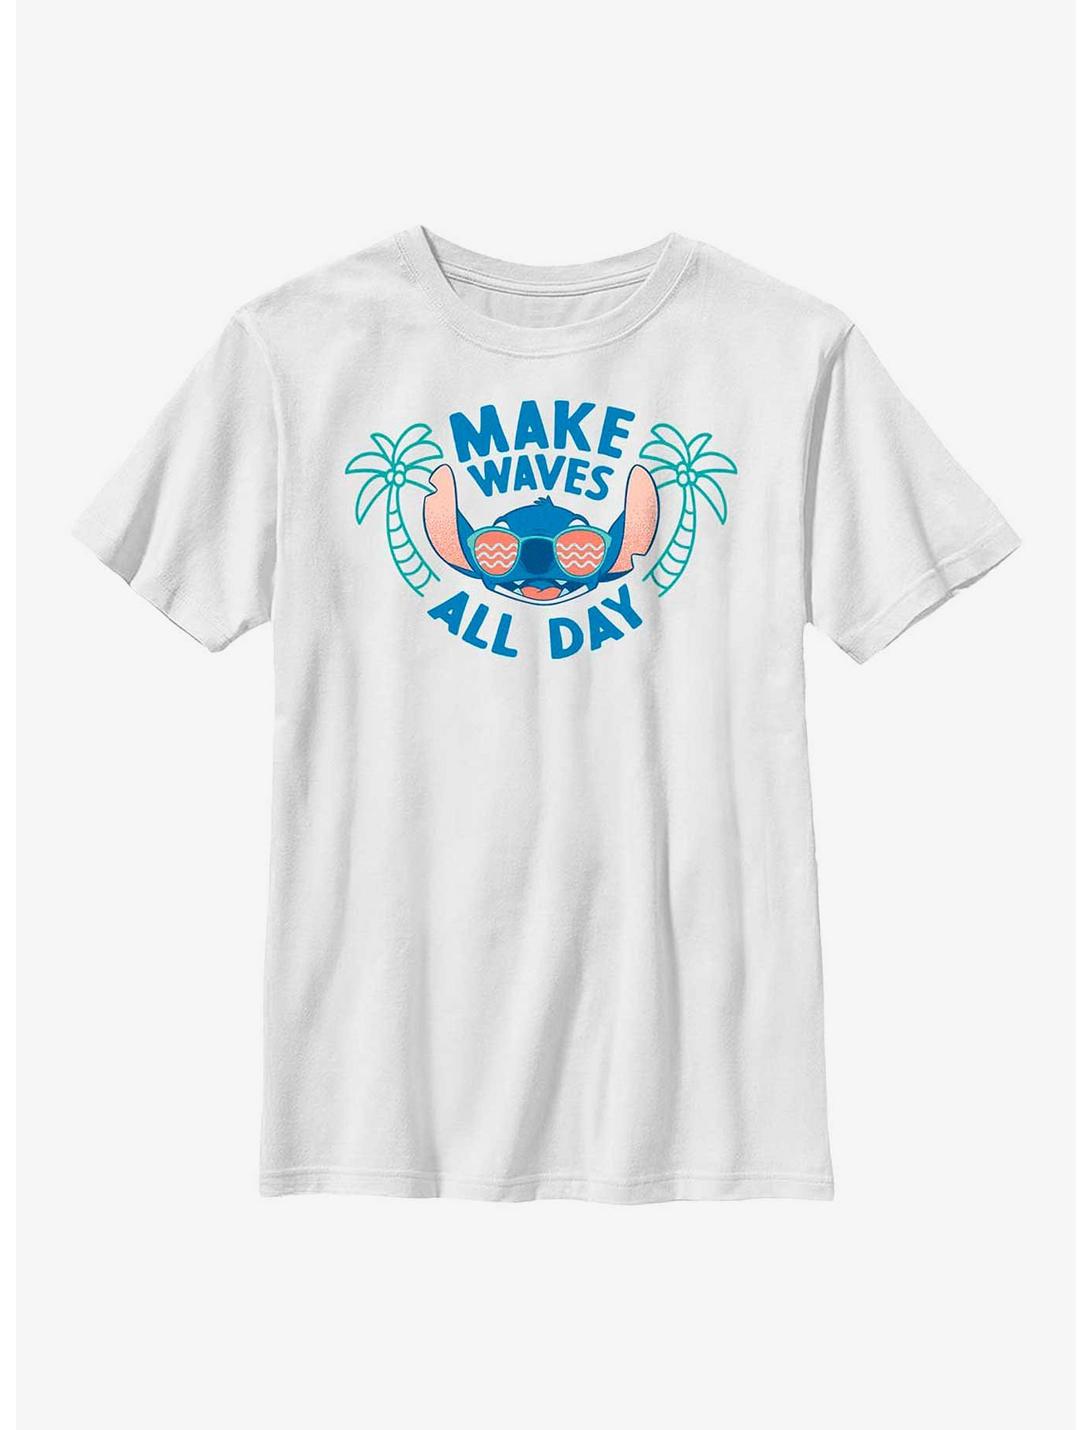 Disney Lilo & Stitch Make Waves All Day Youth T-Shirt, WHITE, hi-res